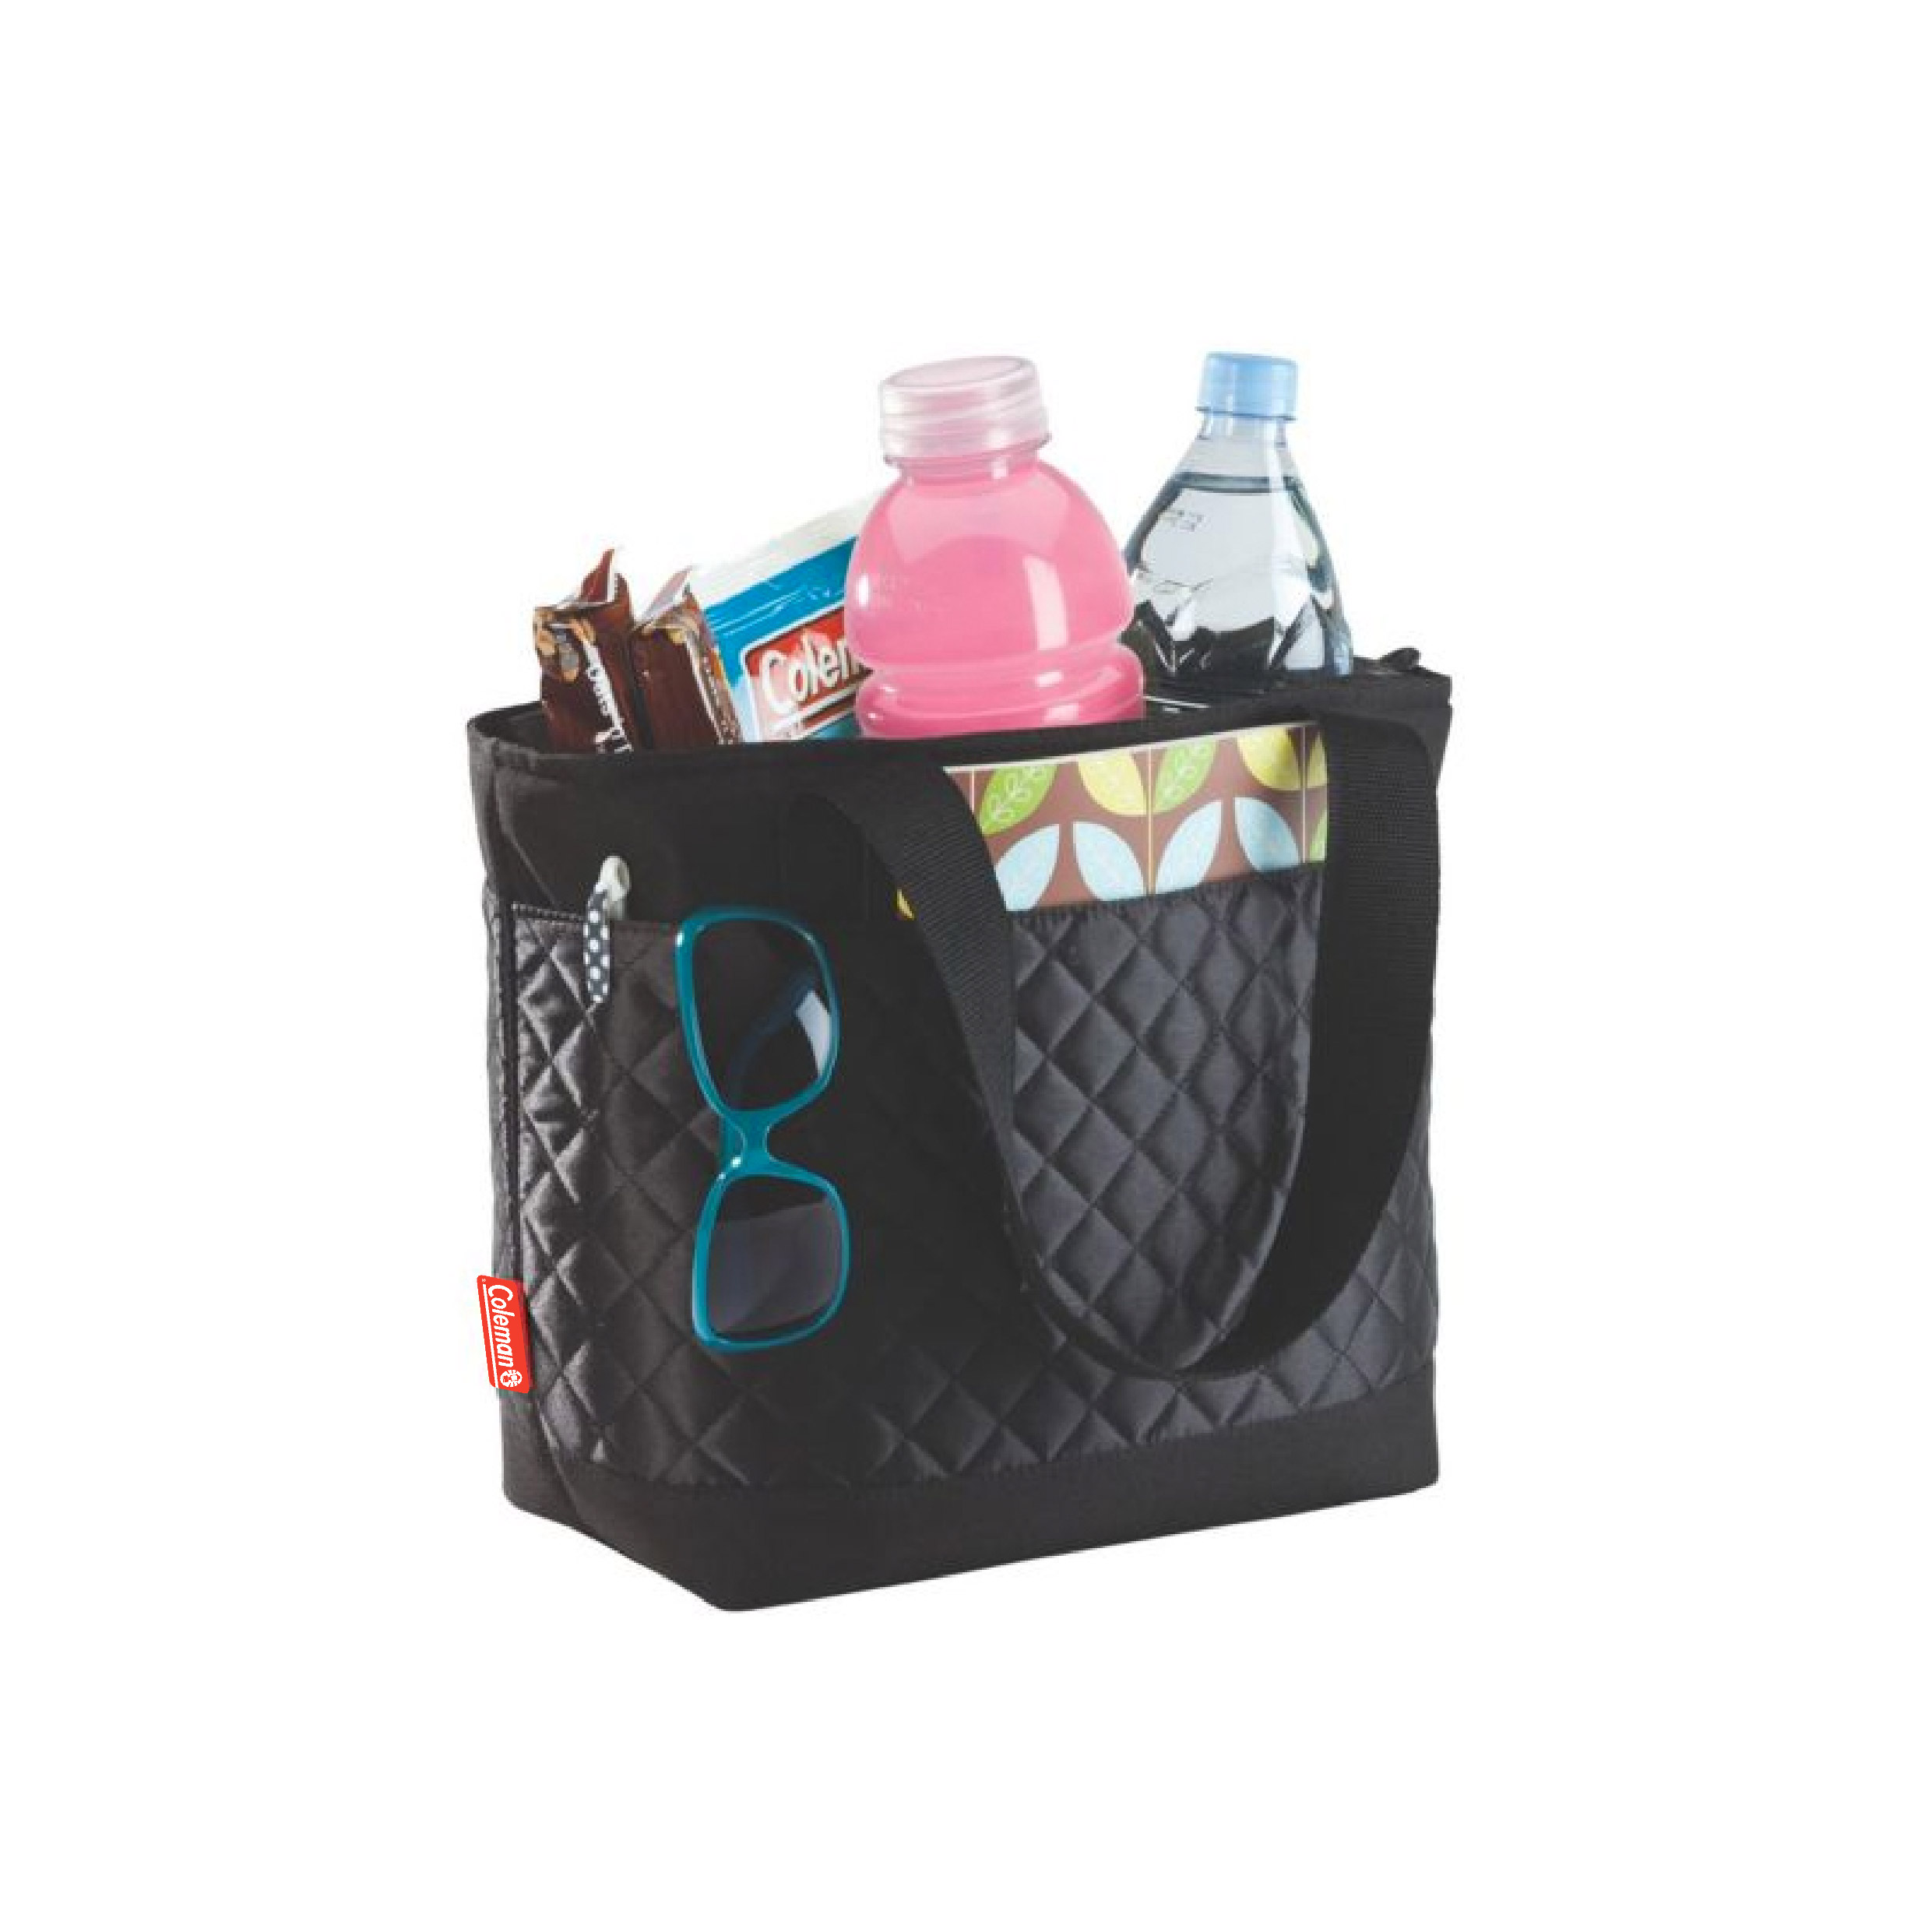 Quilted Cooler tote bag, Heat-welded seams prevent leaks, holds 24 cans.